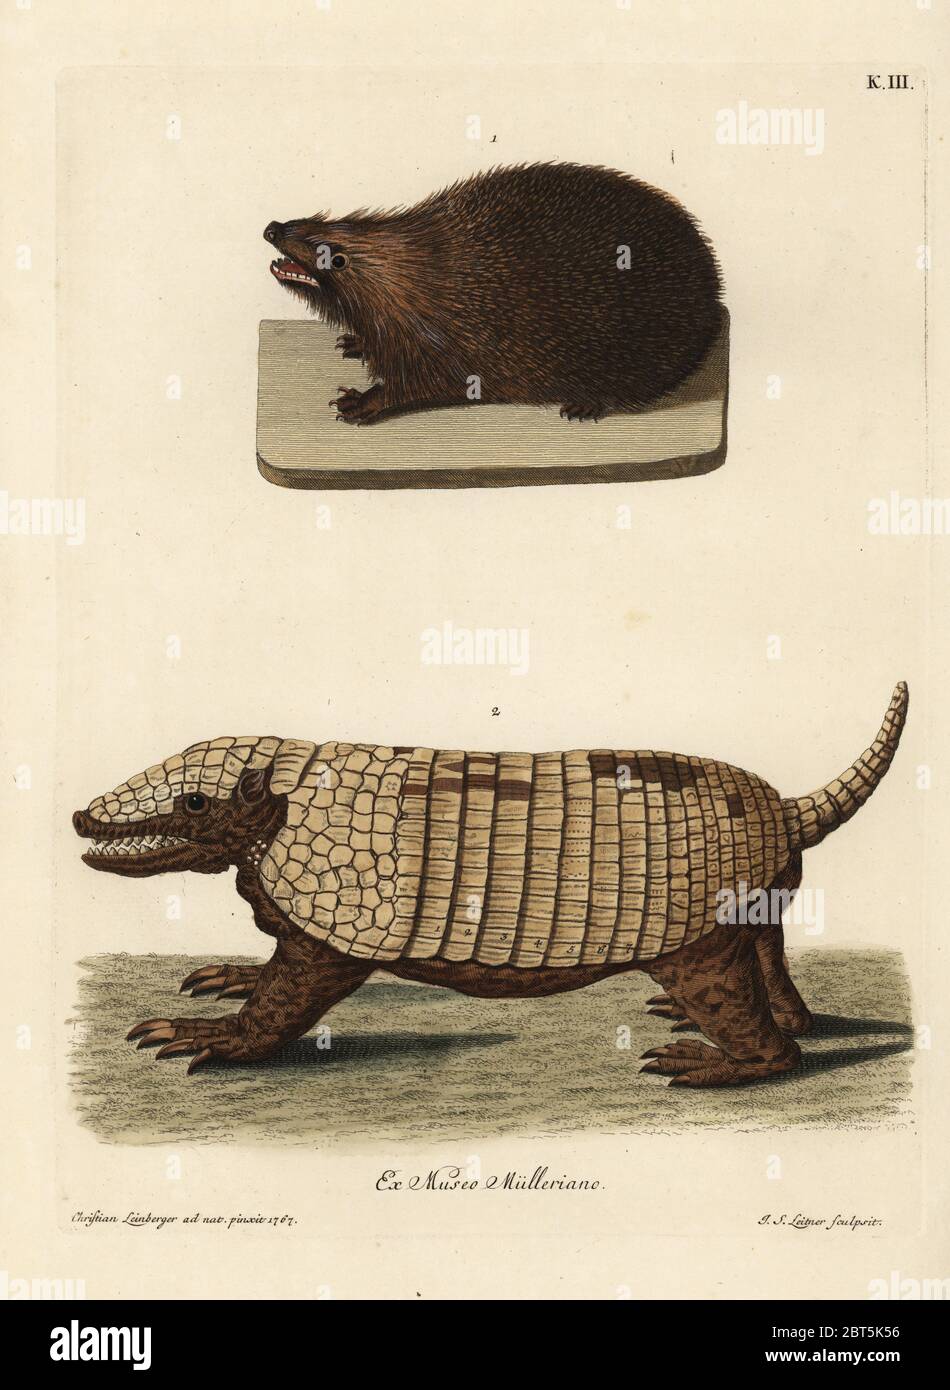 European hedgehog, Erinaceus europaeus, and seven-banded armadillo, Dasypus septemcinctus. (Porc epic de Zelande, Tatou ou armadillo d'Amerique.) Handcoloured copperplate engraving by Johann Sebastian Leitner after an illustration from nature by Christian Leinberger from Georg Wolfgang Knorr's Deliciae Naturae Selectae of Kabinet van Zeldzaamheden der Natuur, Blusse and Son, Nuremberg, 1771. Specimens from a Wunderkammer or Cabinet of Curiosities owned by P.L. Muller. Stock Photo